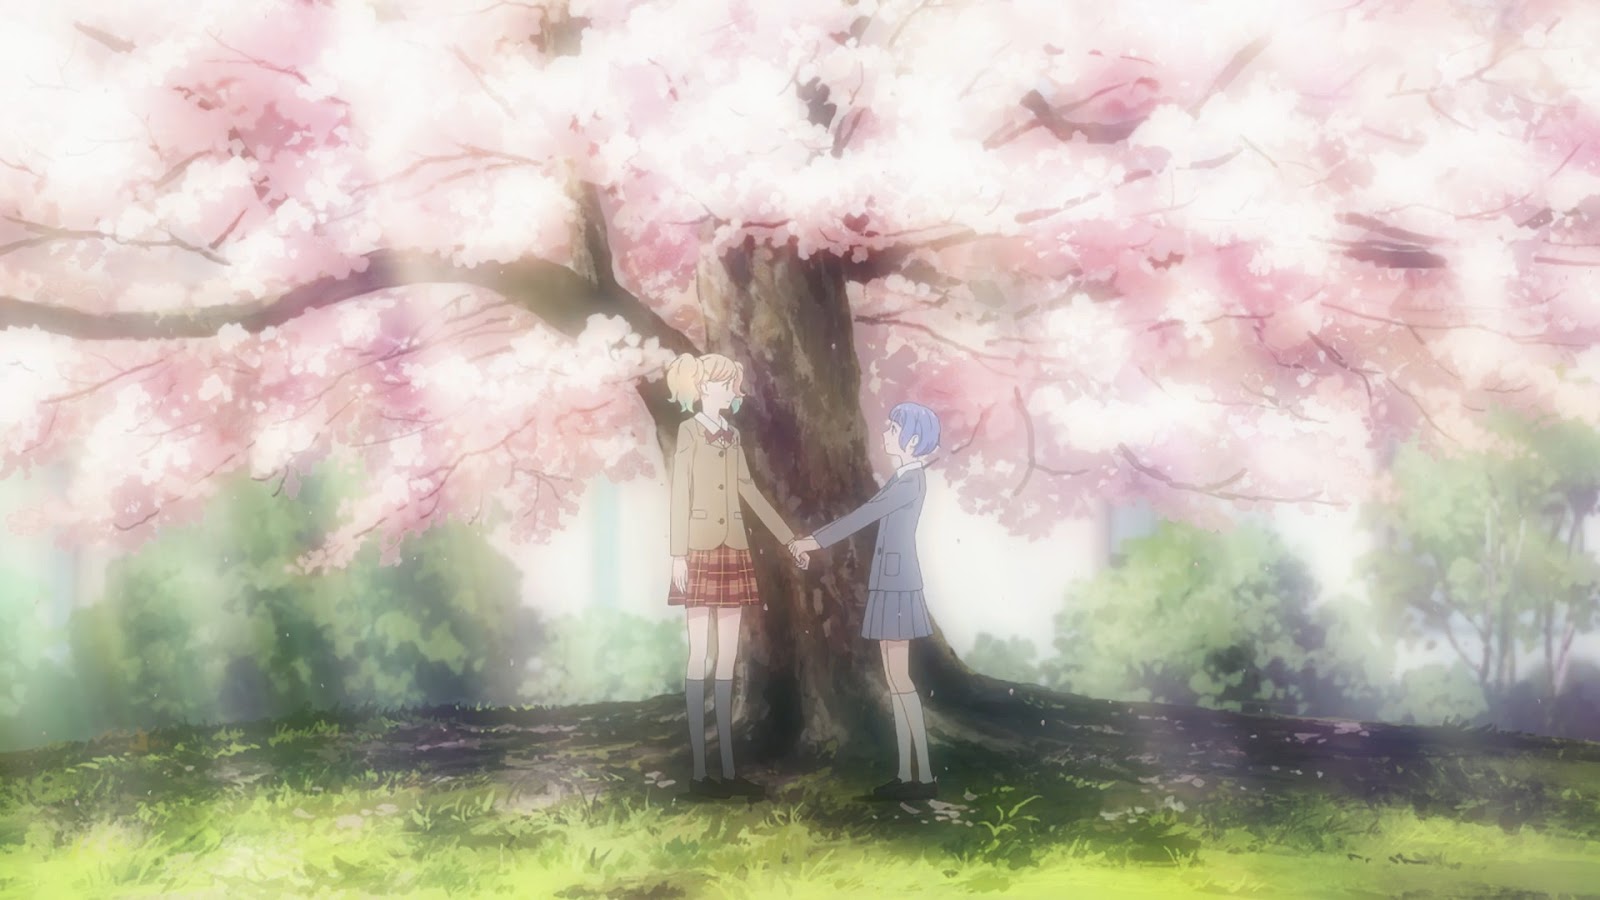 Sarasa and Ai shaking hands underneath the cherry blossoms. Sarasa is a very tall blonde girl and Ai is a shorter blue-haired girl.